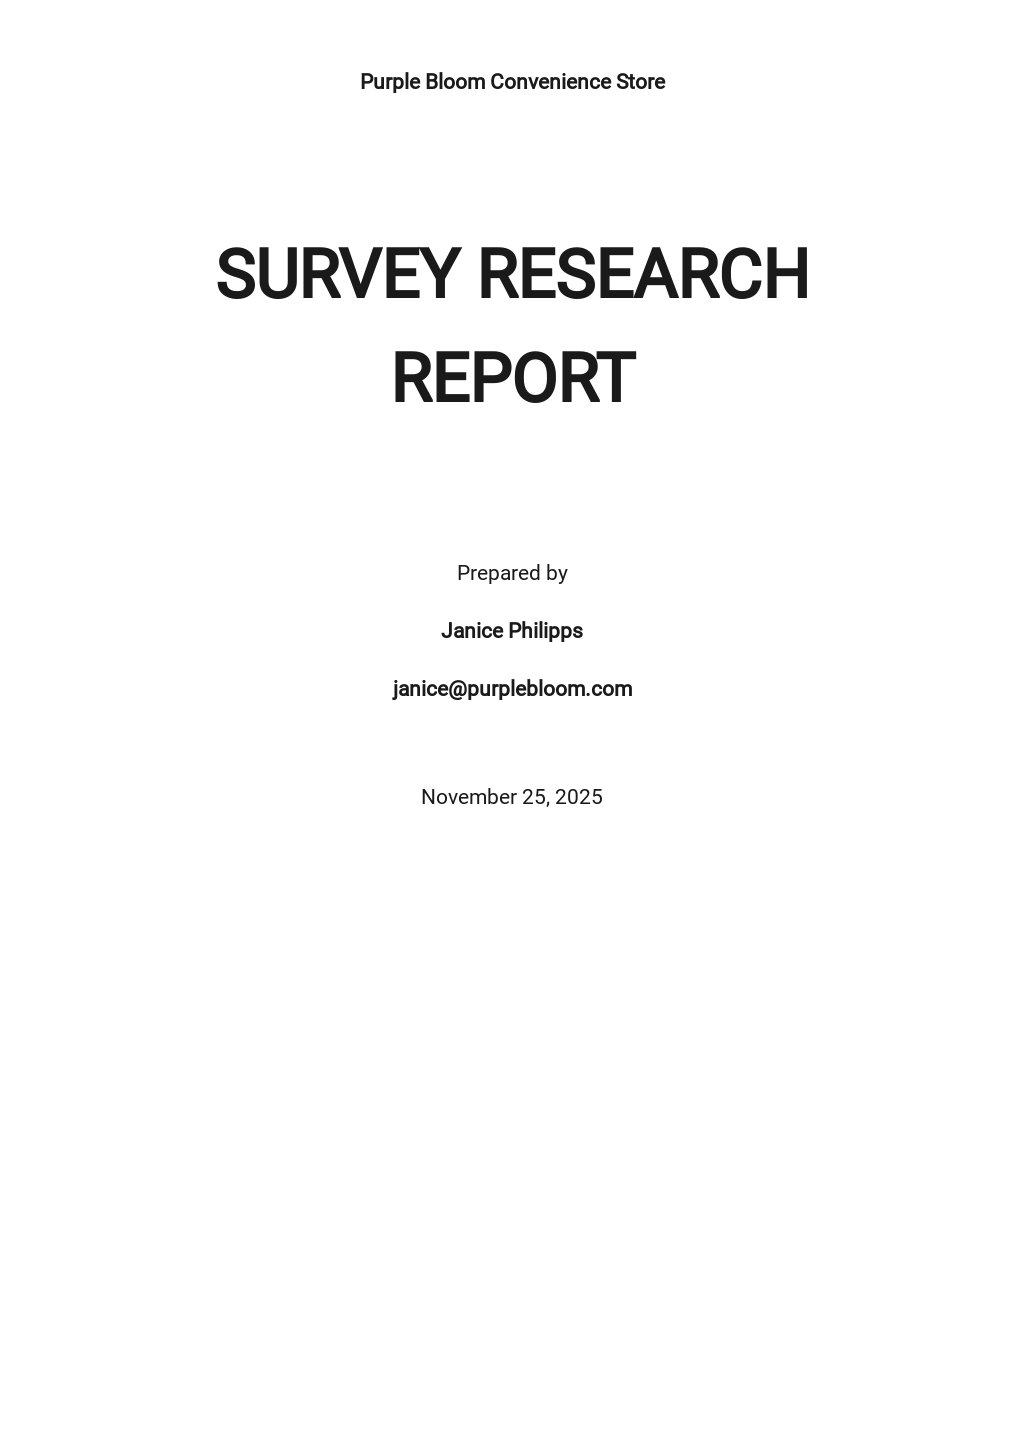 research report template year 5